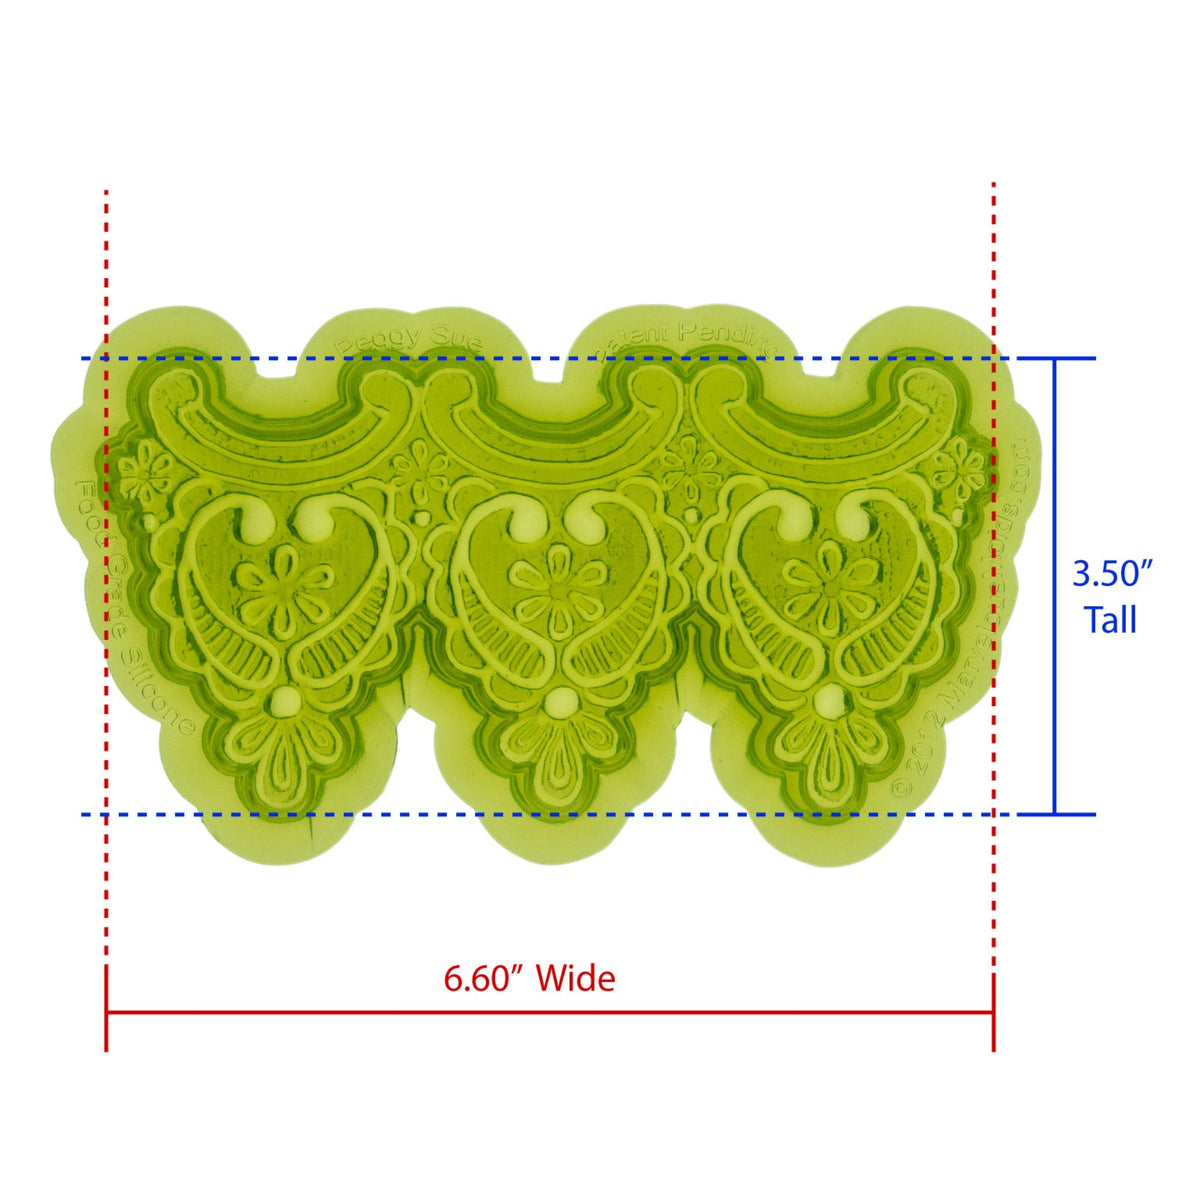 Peggy Sue Lace Silicone Mold Cavity measures 6.60 inches Wide by 3.50 inches Tall, proudly Made in USA